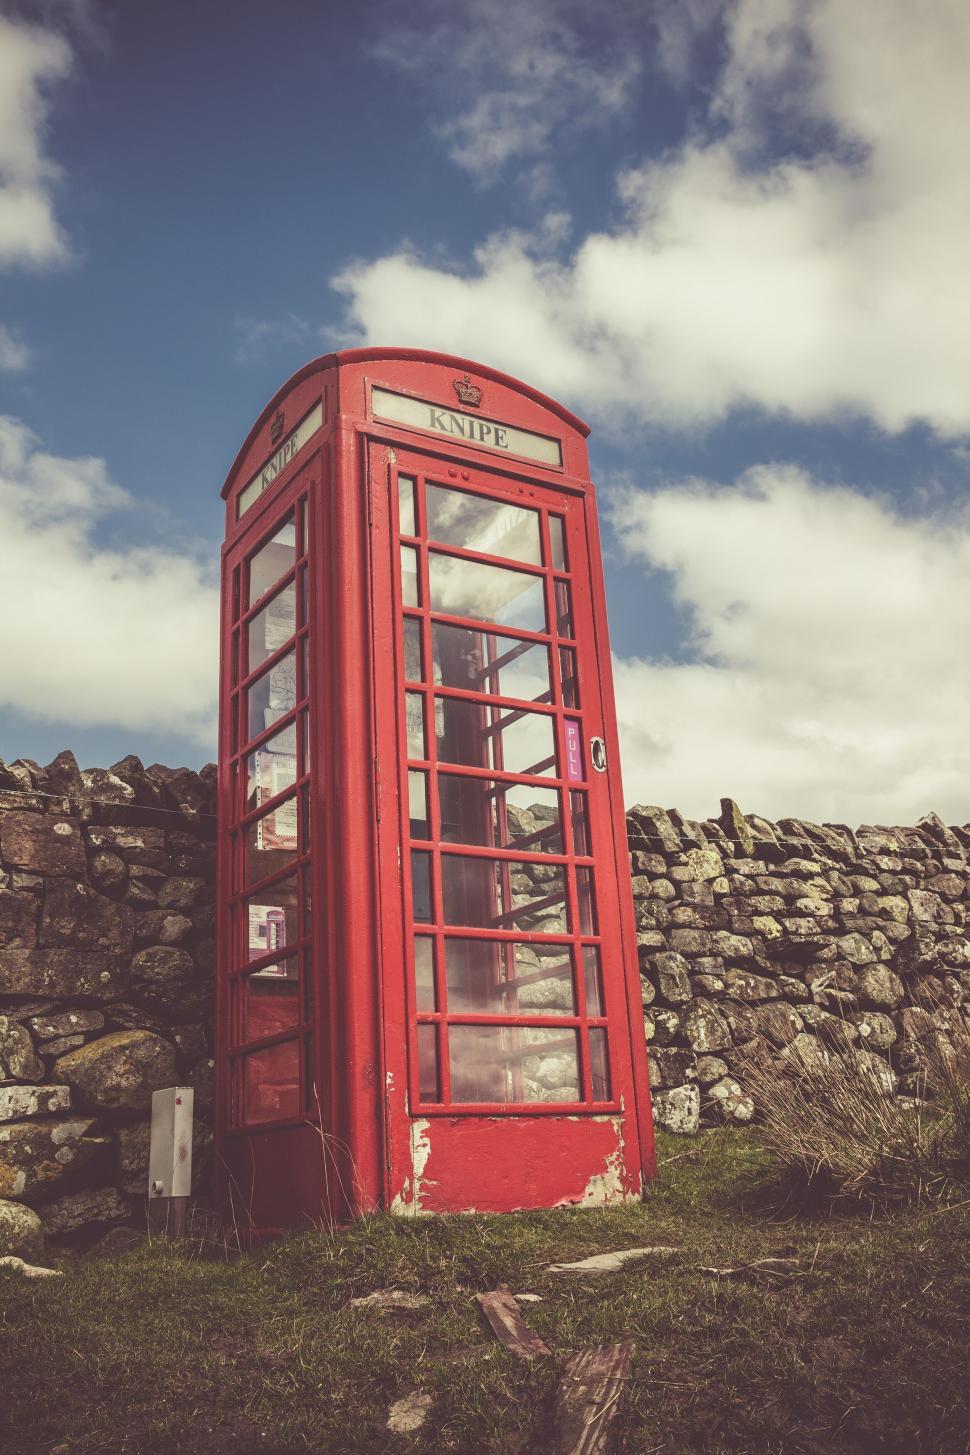 Free Image of Vintage red telephone box in rural setting 